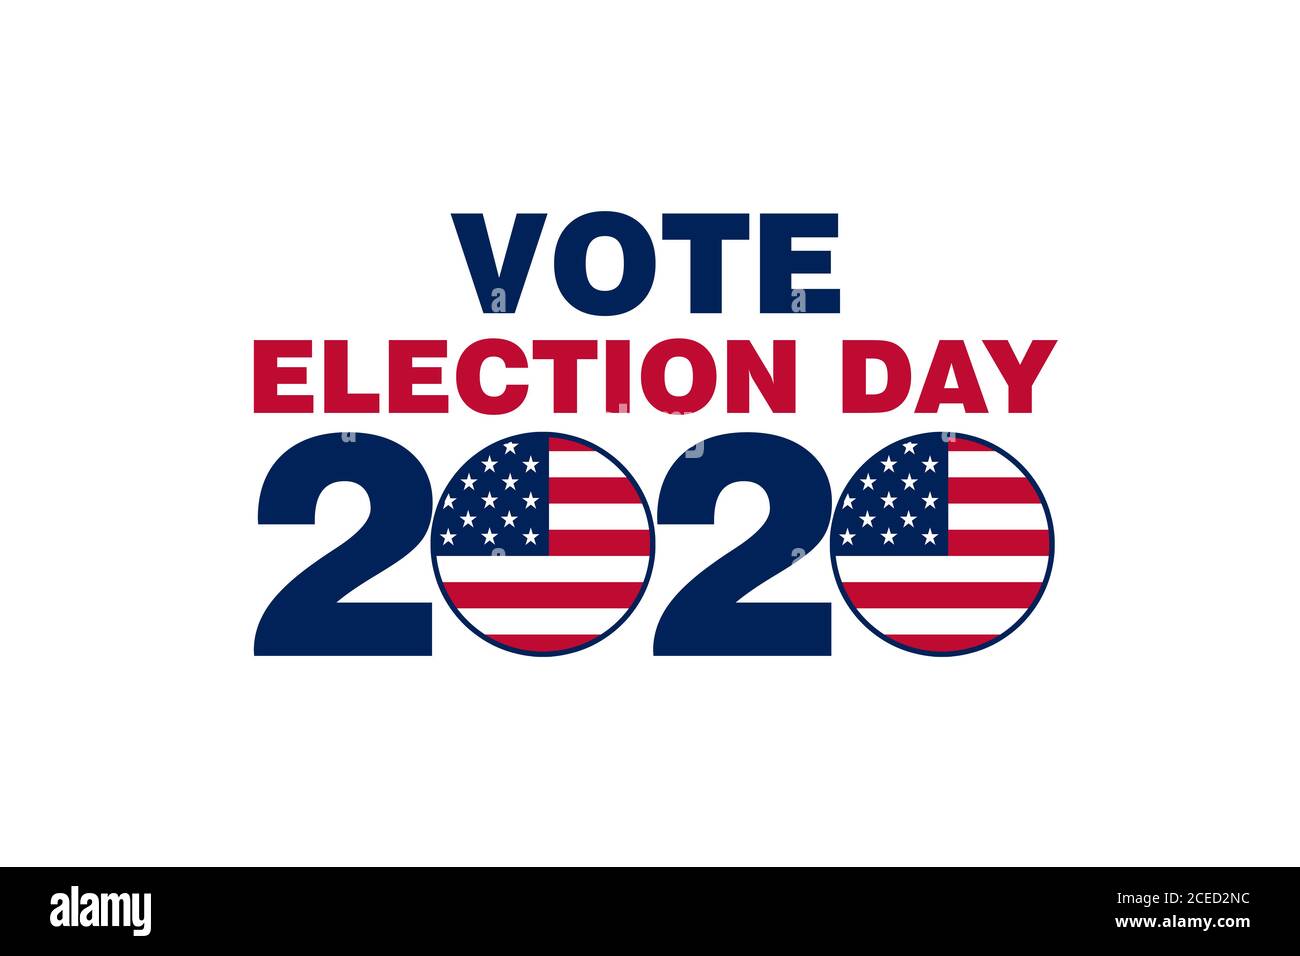 a simple vote election day 2020 slide card illustration graphic Stock Photo